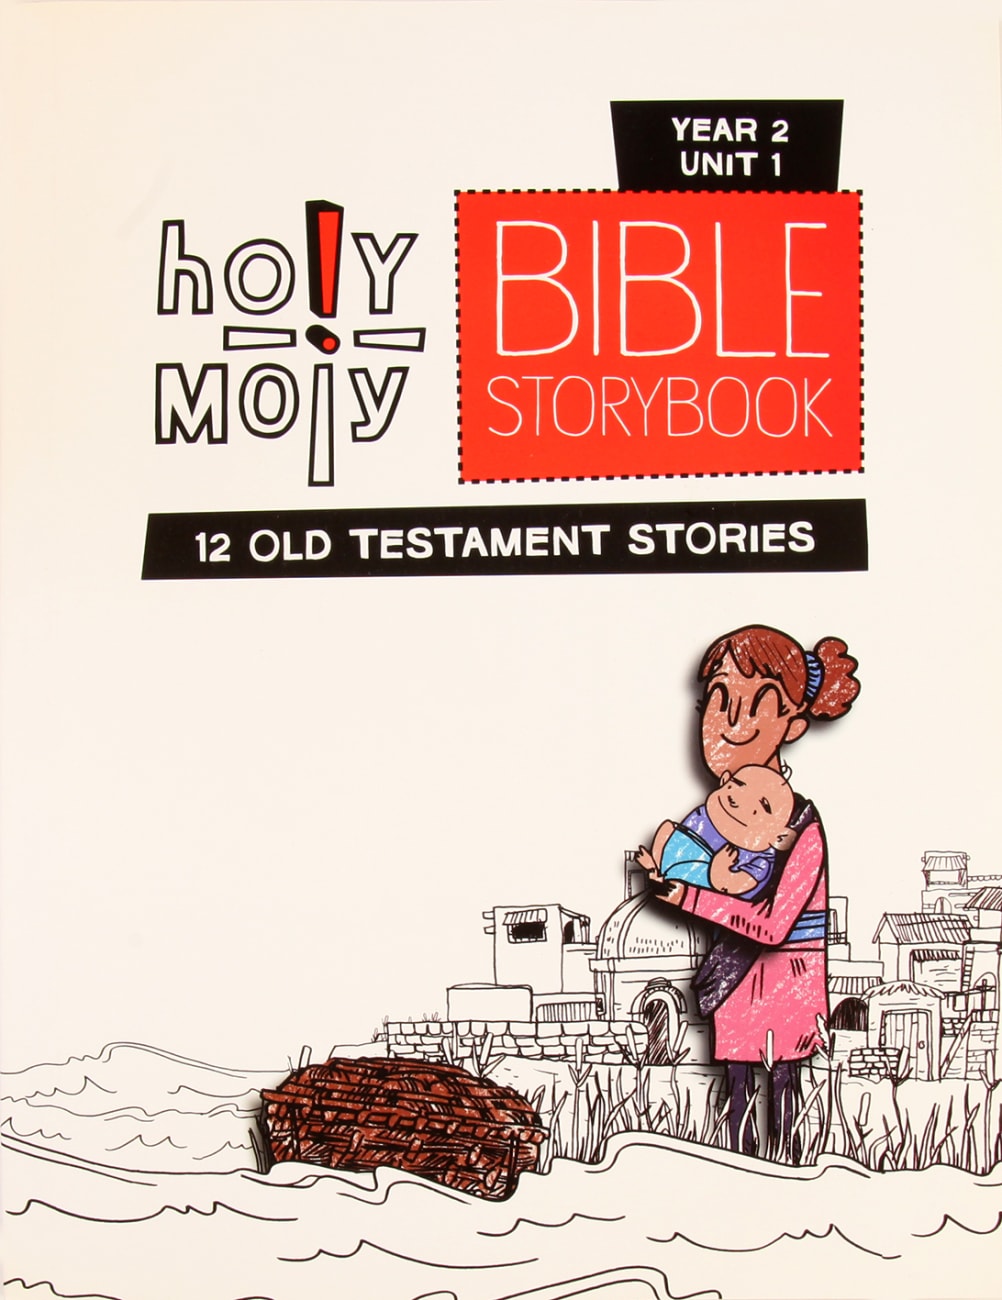 Year 2 Unit 1 Bible Storybook (Holy Moly Series) Paperback